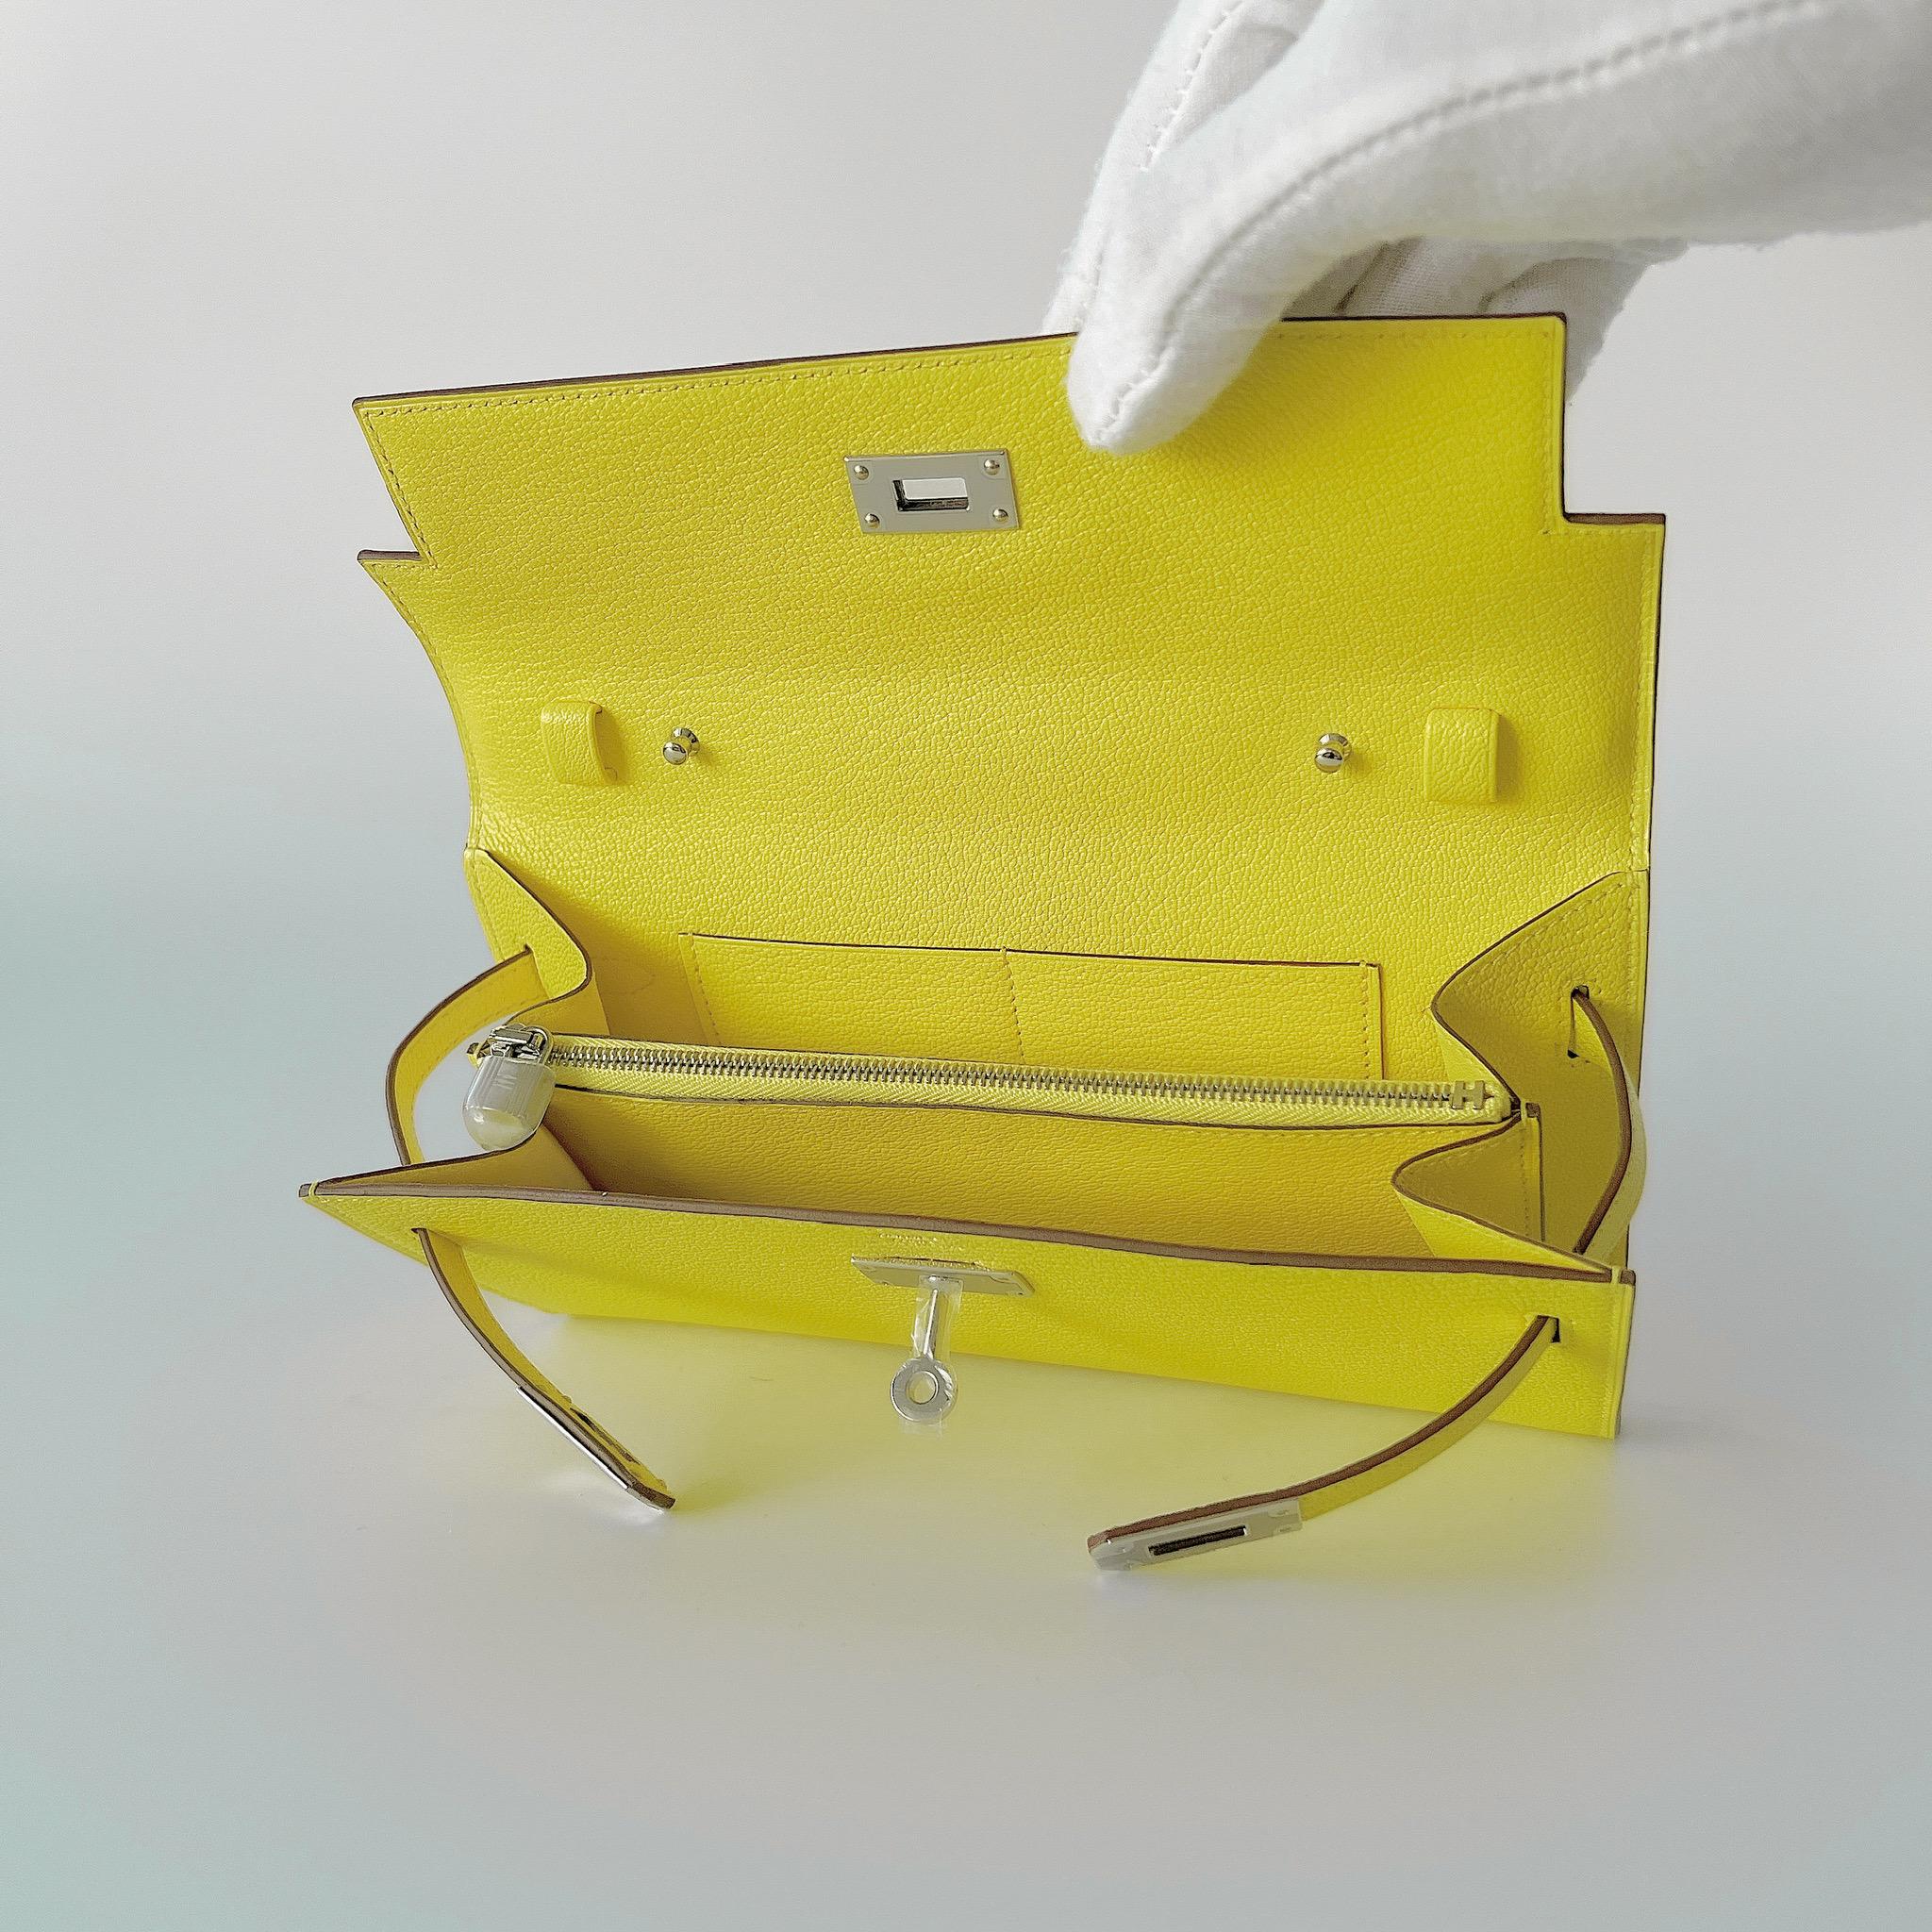 Women's Hermes Kelly Classique To Go Wallet, In Jaune Citron Epsom Leather And Palladium